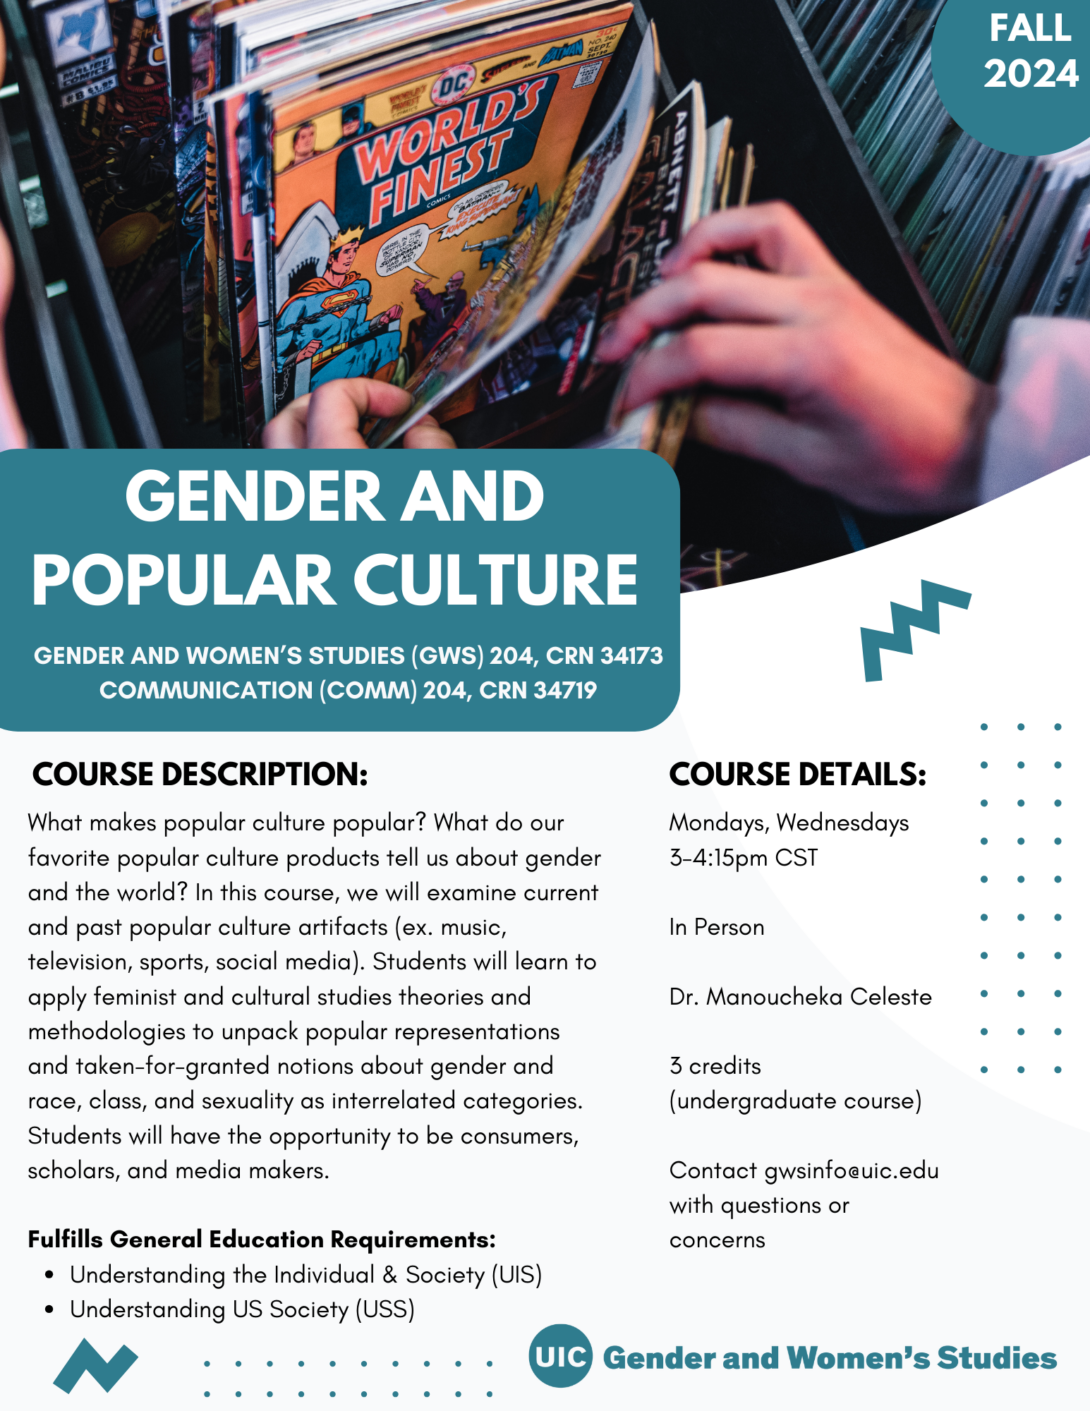 A flyer promoting the fall 2024 Gender and Popular Culture course. The top portion of the flyer includes a photo of two hands flipping through comic books. In the top right corner is a teal circle with Fall 2024 inside it in white text. The bottom left portion of the photo is covered with a teal block that includes the course title in white text. Below that is the course description and course details in black text on a white background. A teal GWS logo appears in the bottom right of the flyer. Parallel lines of teal dots and teal geometric designs decorate the page.